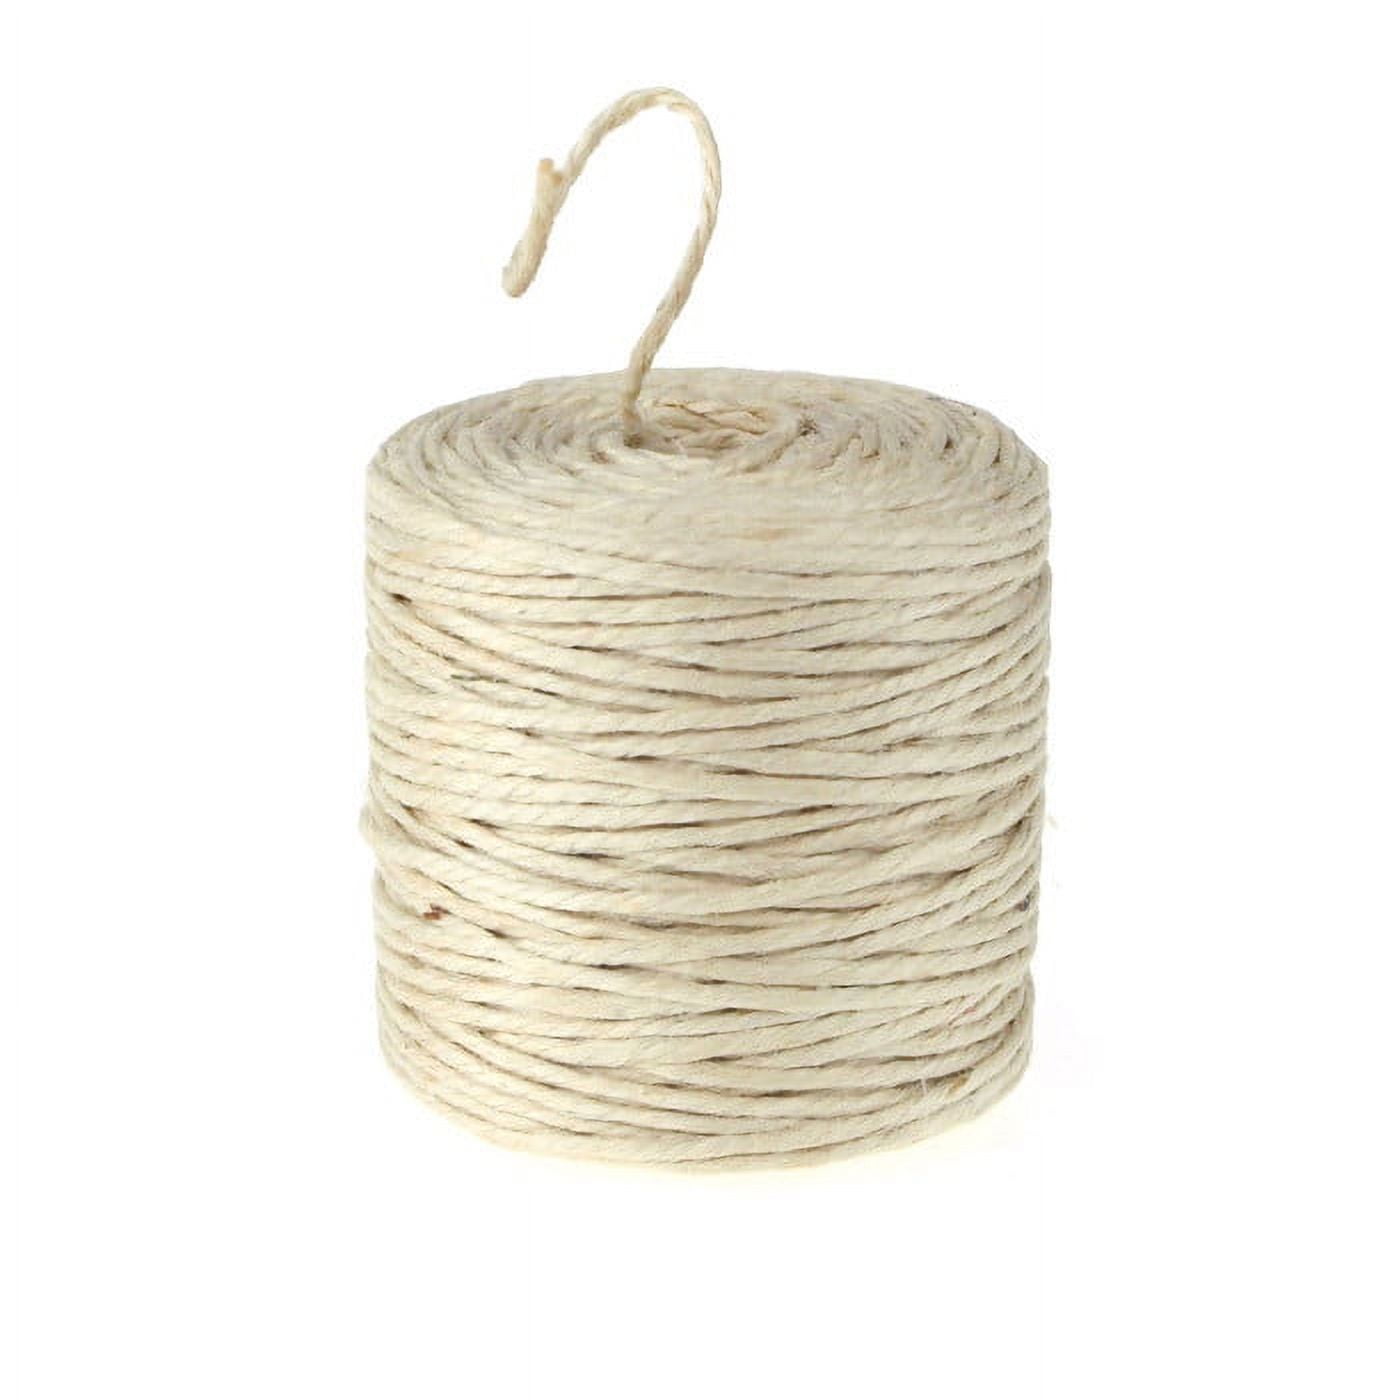 Leisure Arts 4-Ply Natural Floral Jute Rope Cord in Roll - 1LB Reusable 